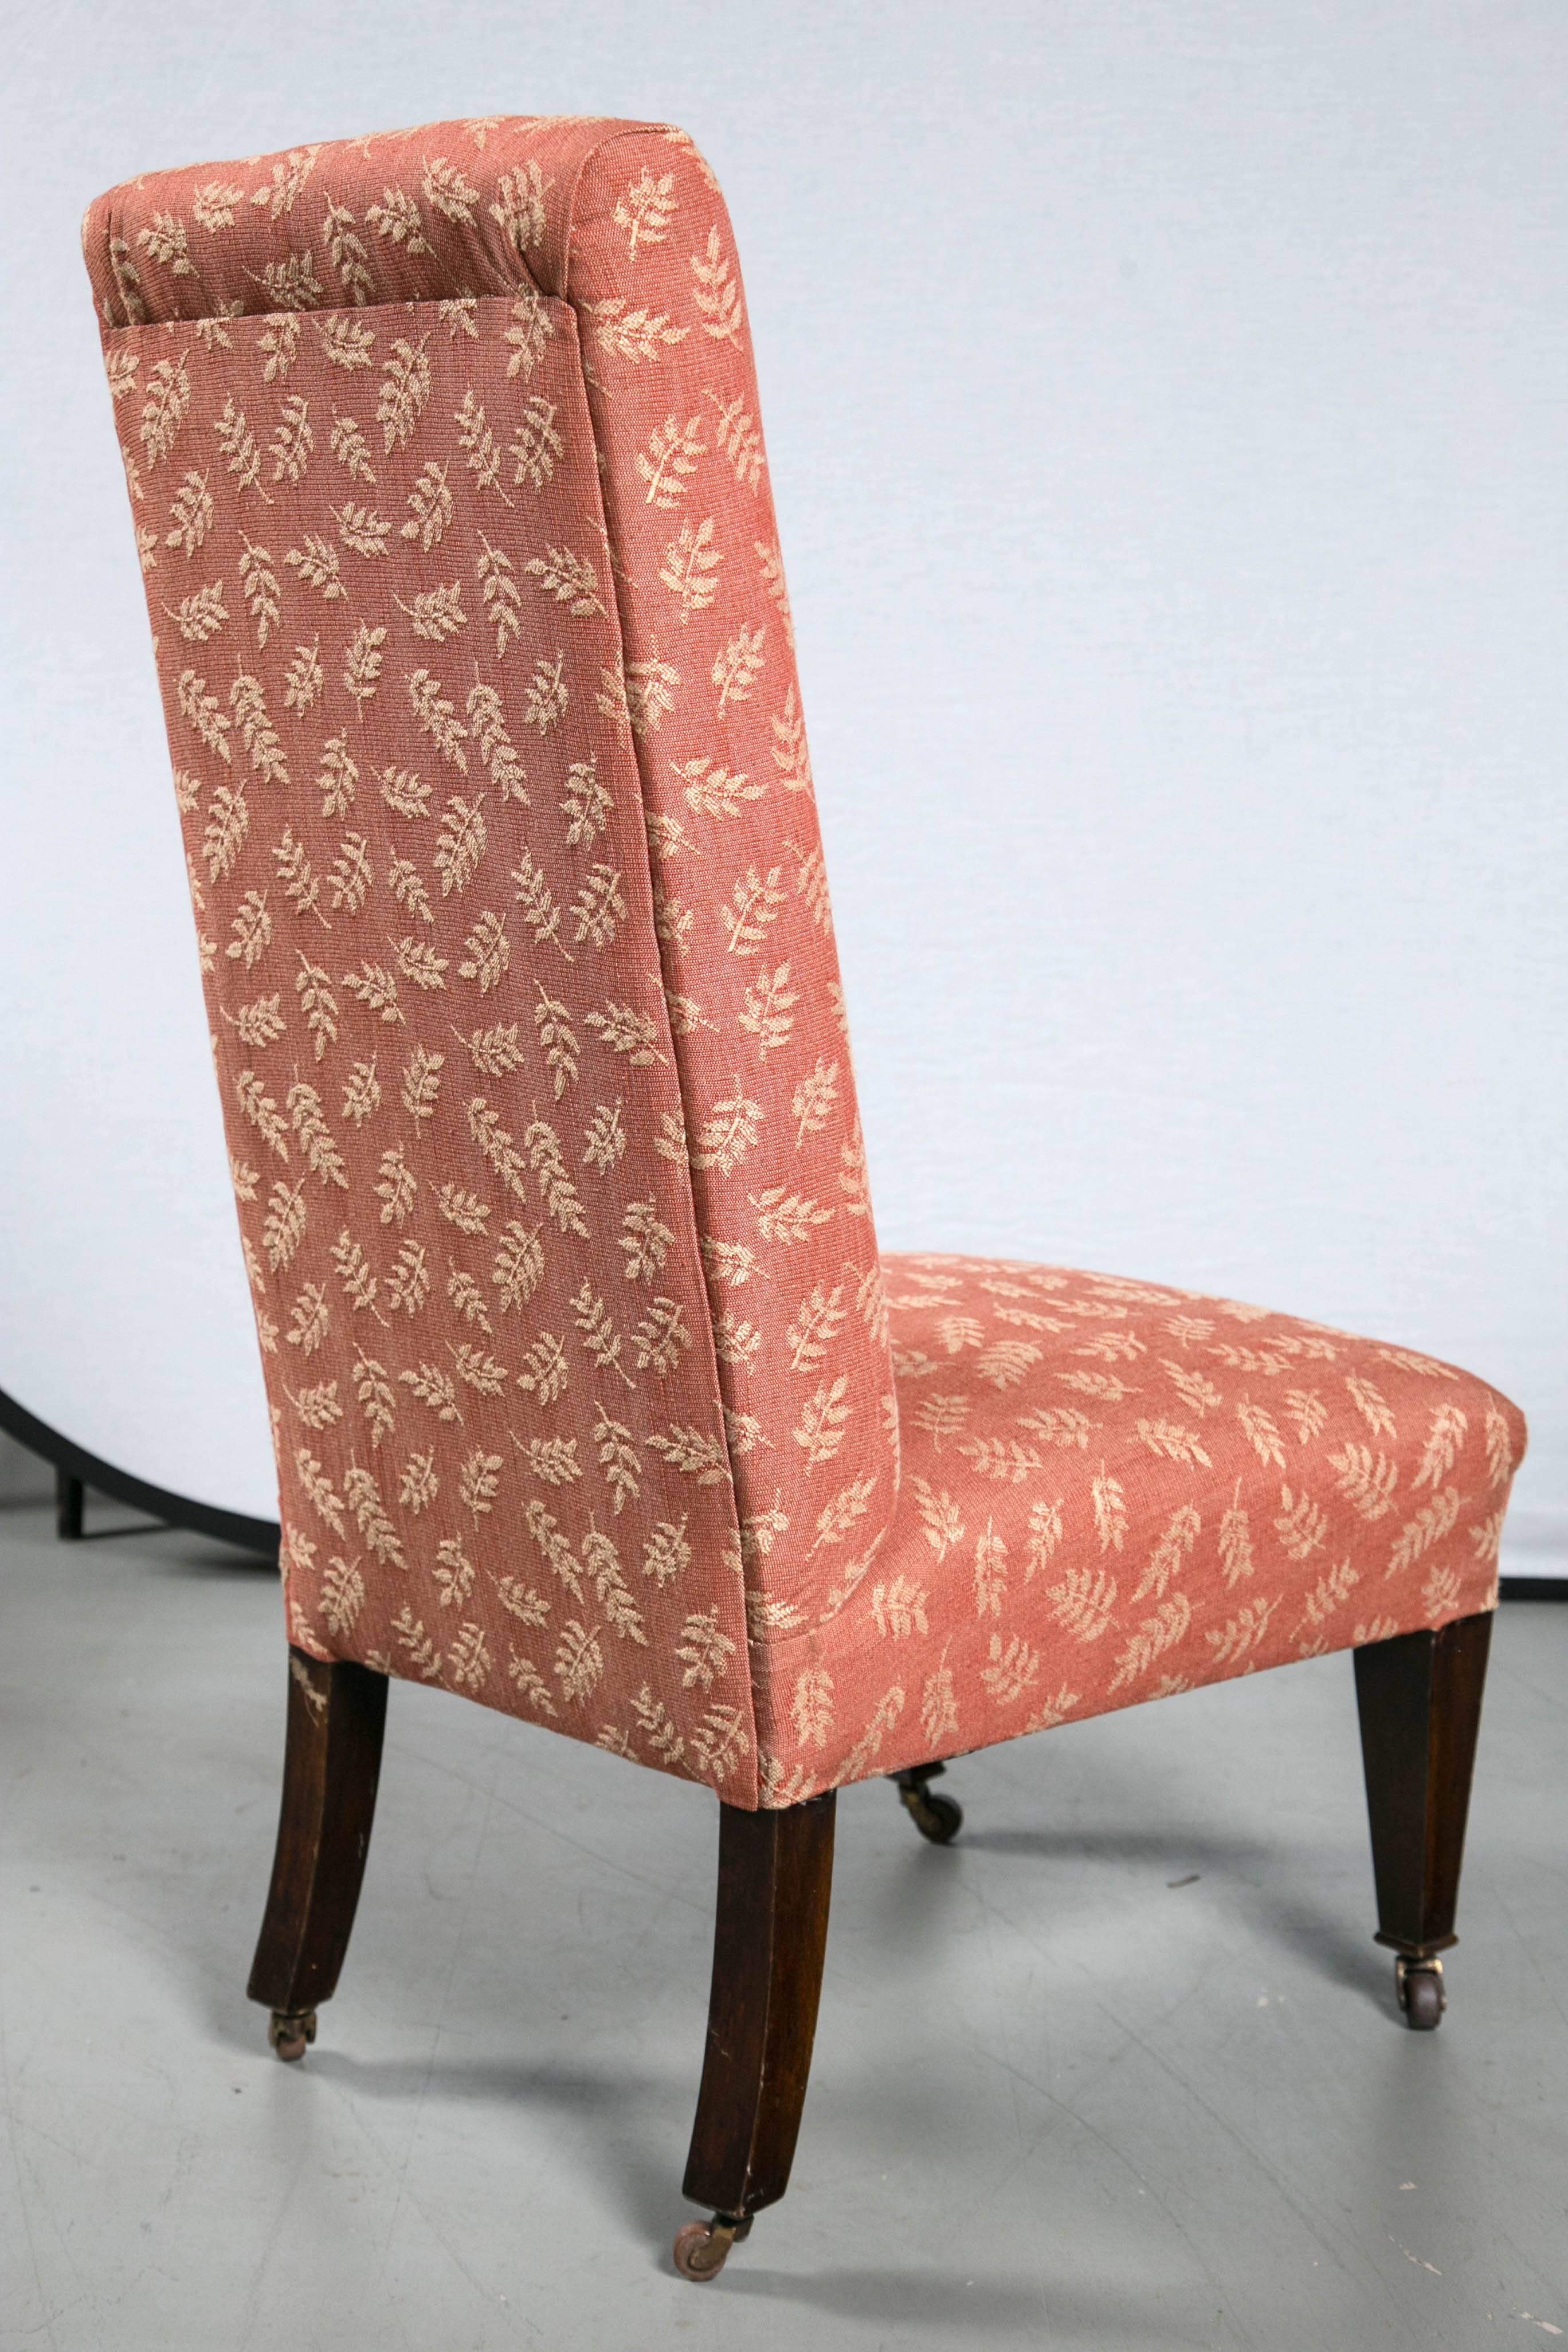 English High Back Chair In Excellent Condition For Sale In Stamford, CT